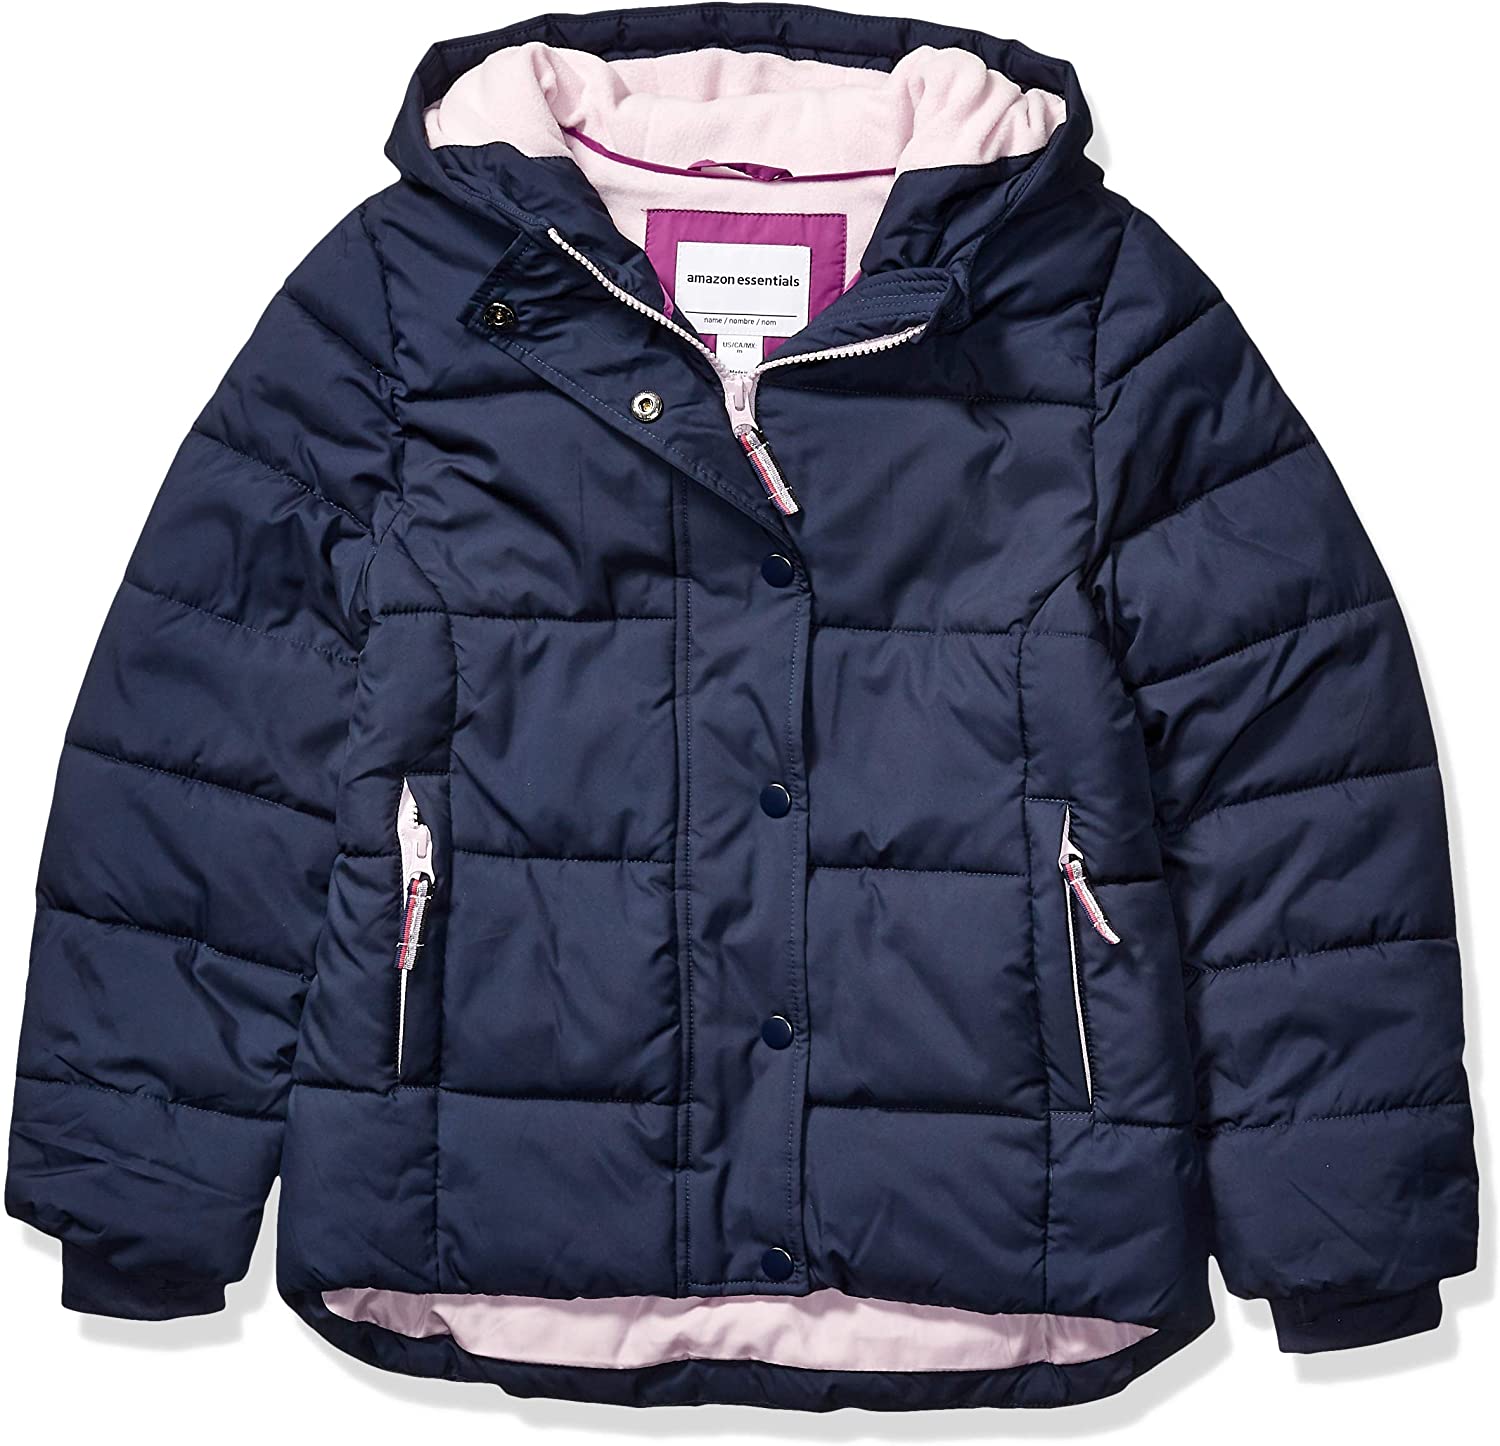 Winter Jackets - Buy Winter Jackets online at Best Prices in India